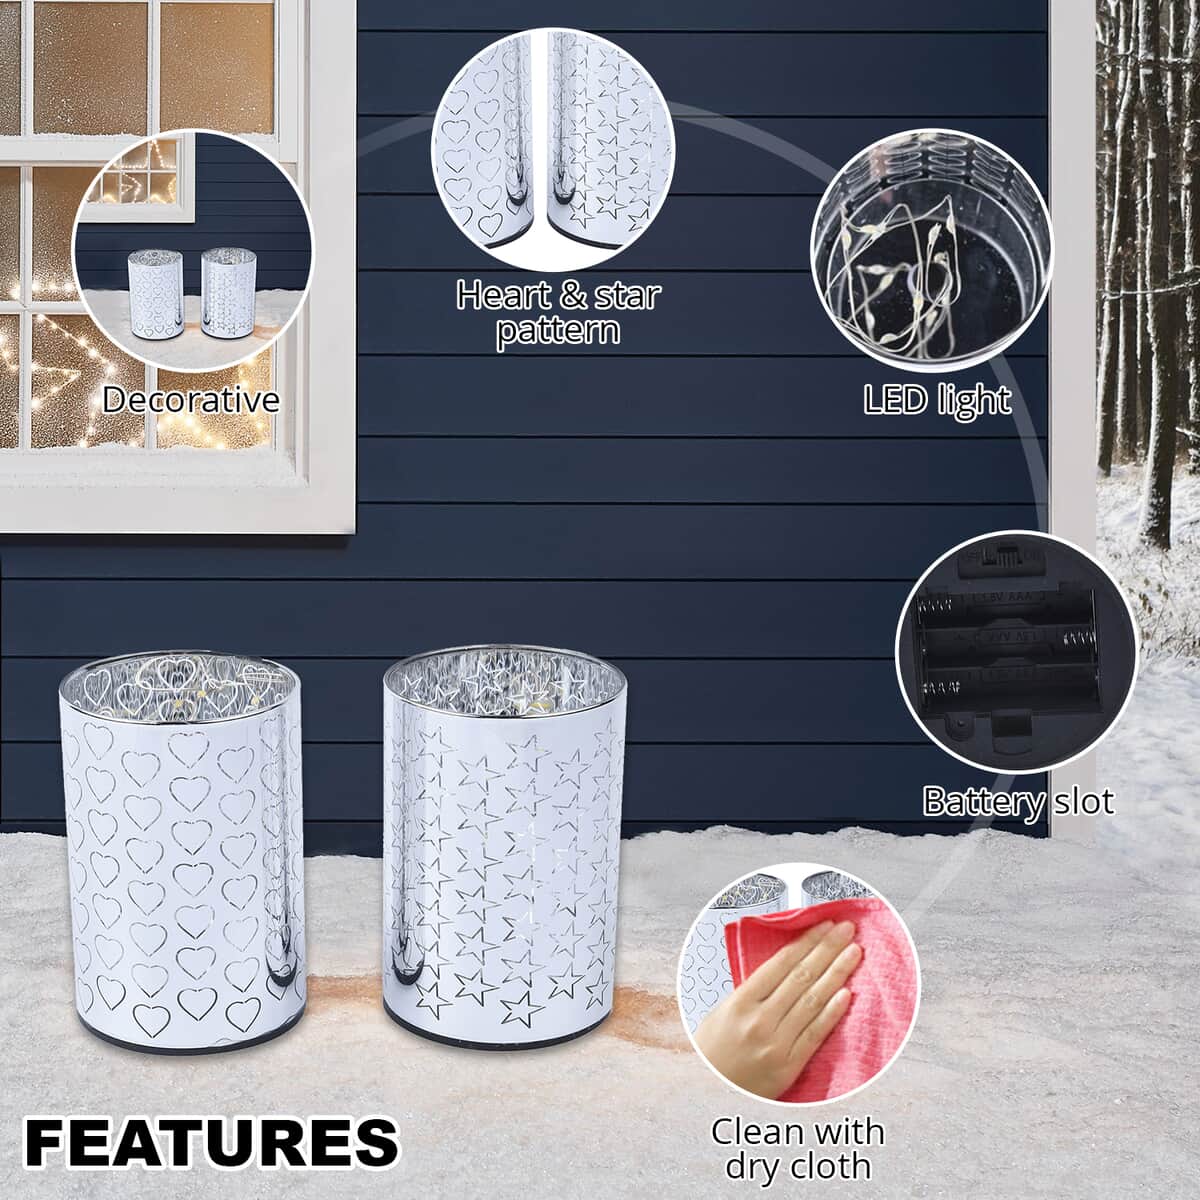 Set of 2 Silver Color Warm LED Lantern Heart and Star Pattern (2.8"x3.9") (Battery 3AAA not included) image number 2